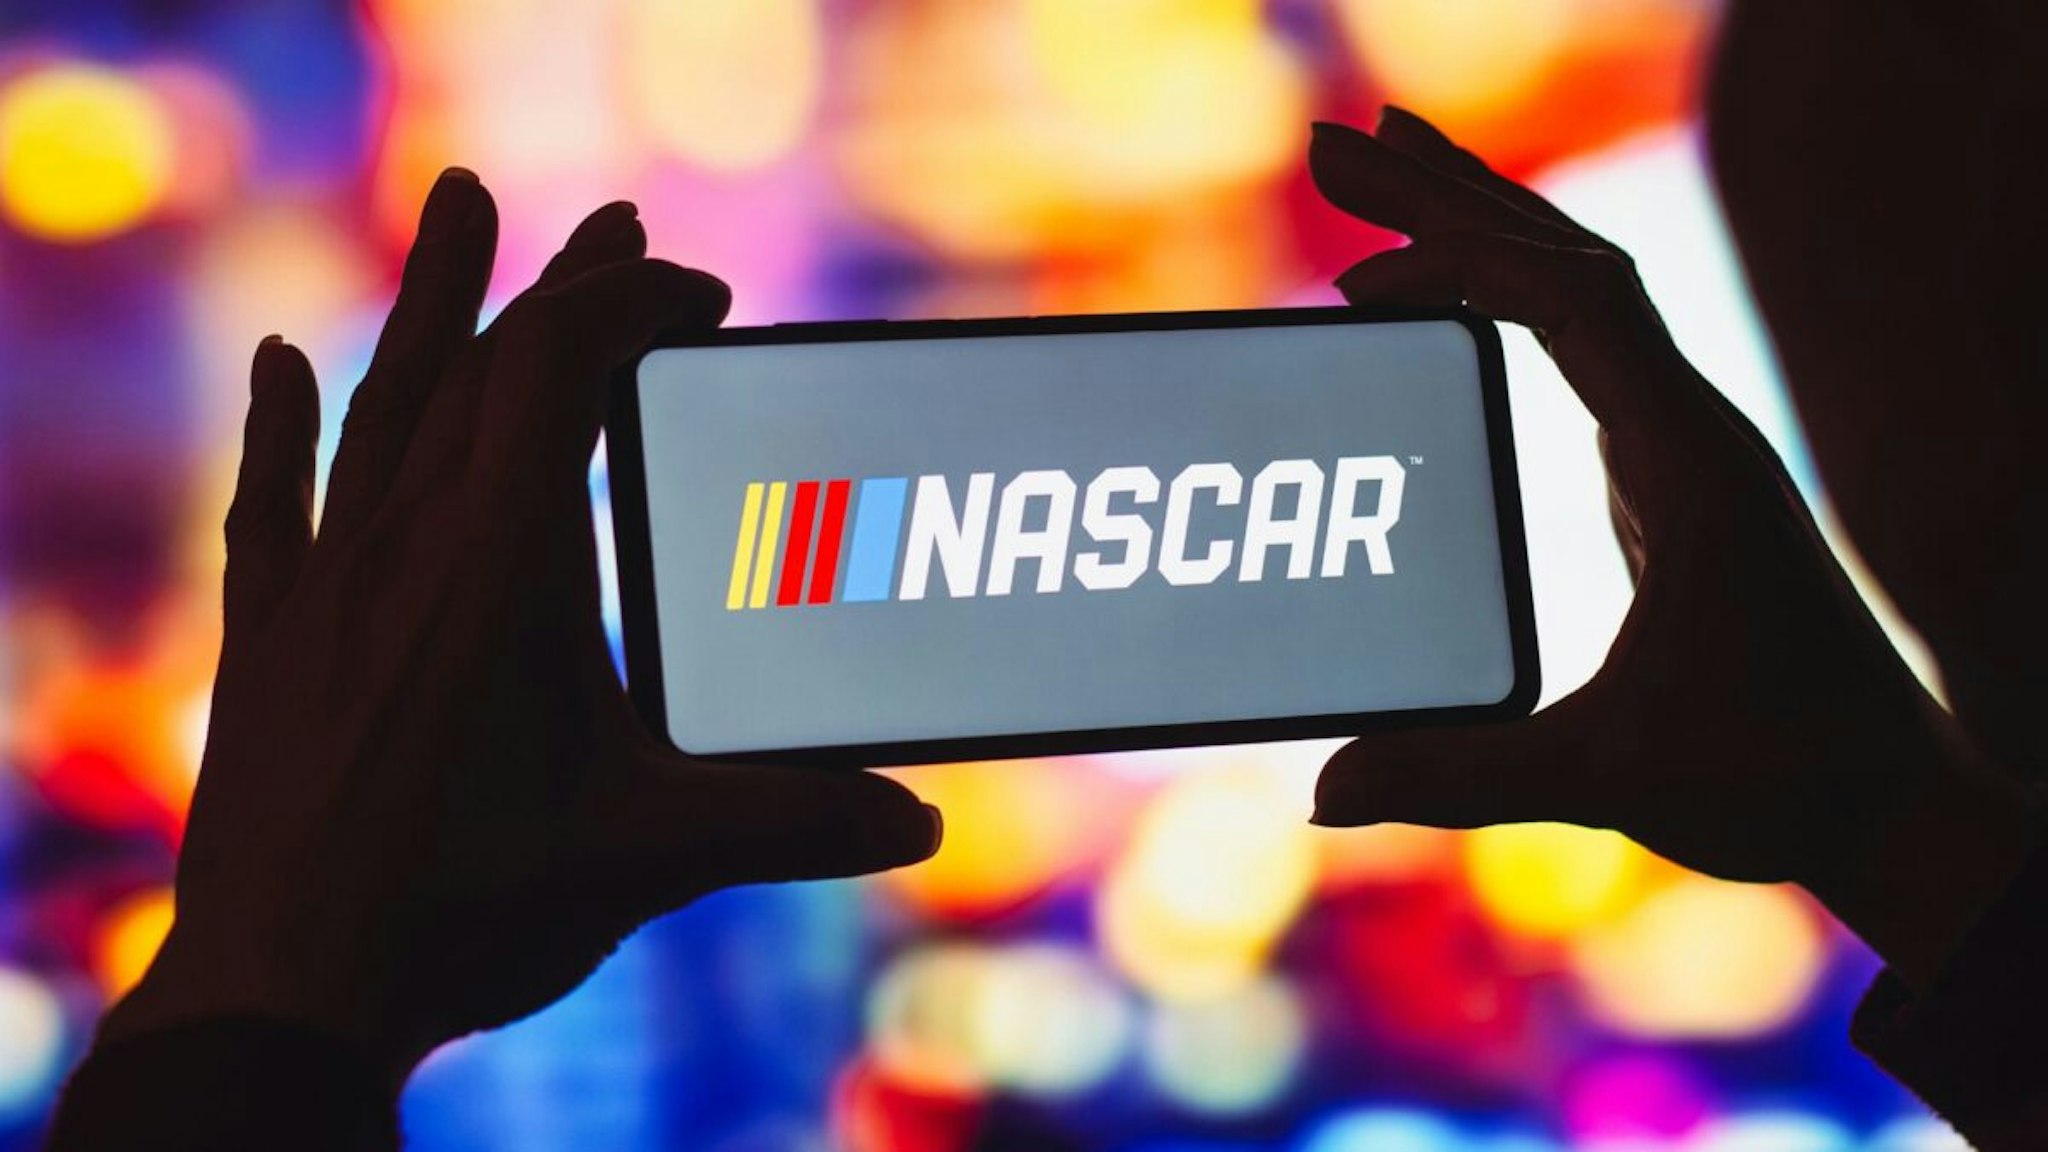 In this photo illustration, the National Association for Stock Car Auto Racing (NASCAR) logo is displayed on a smartphone screen.